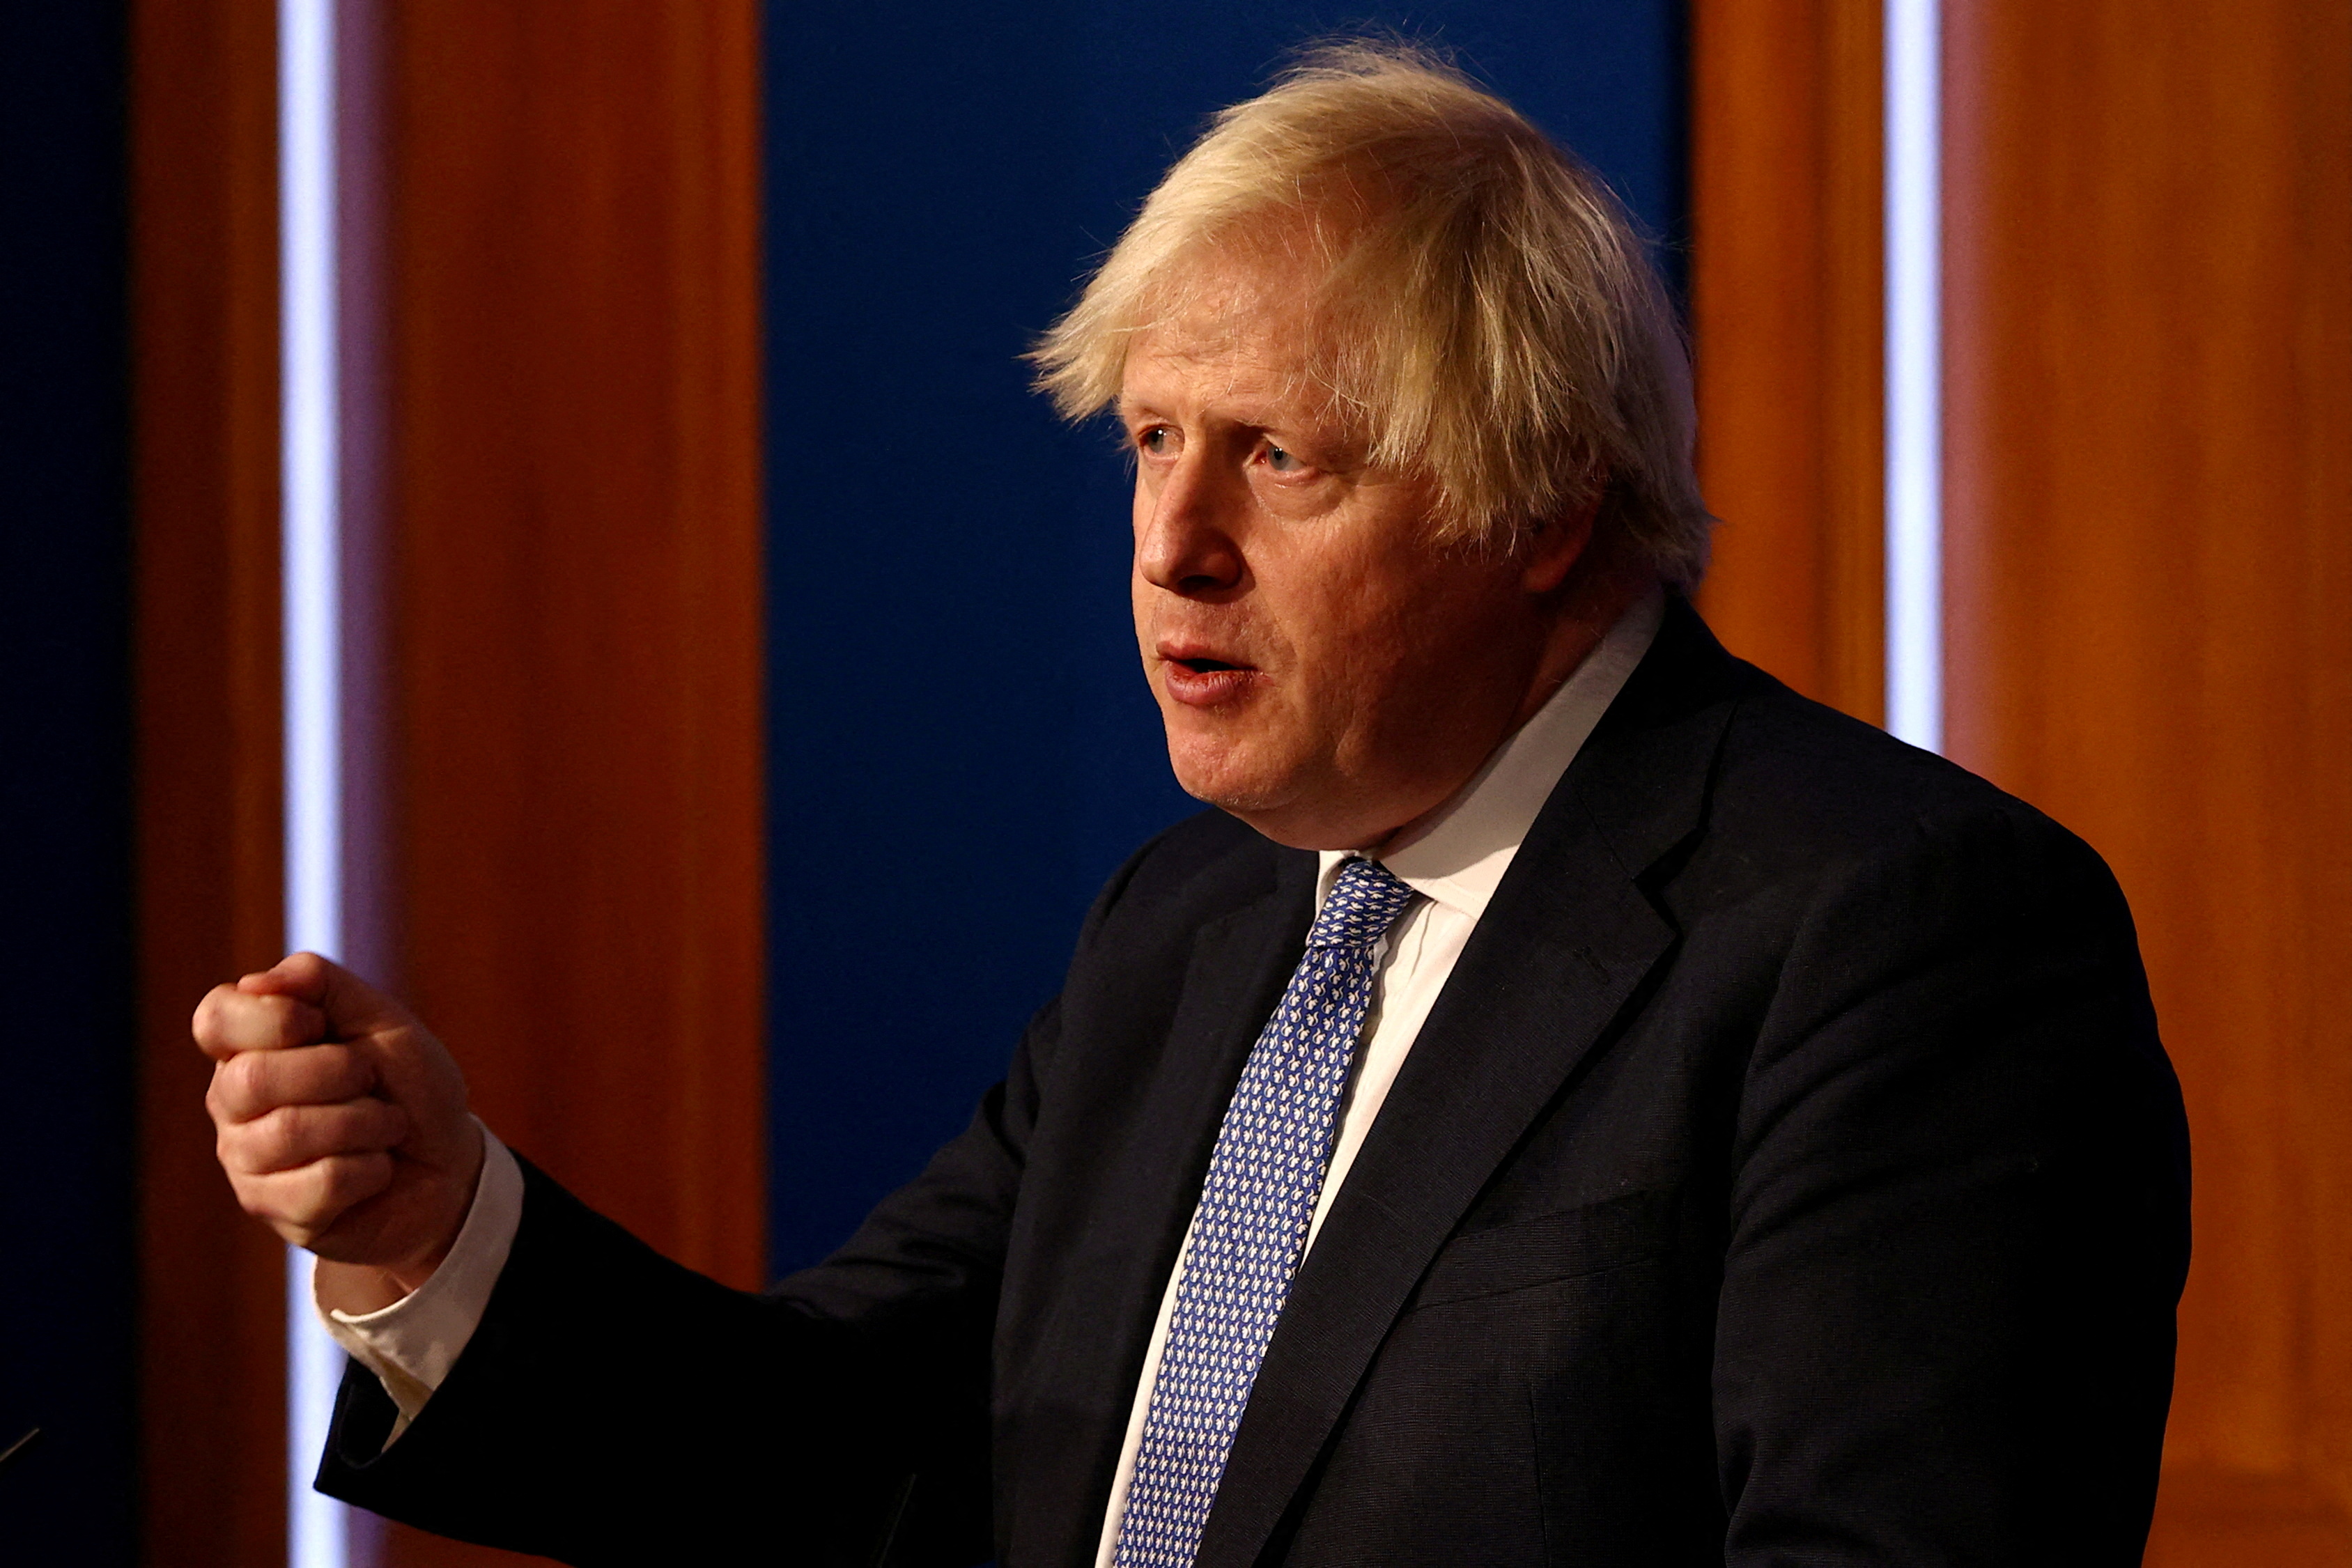 British Prime Minister Boris Johnson holds a news conference, in London